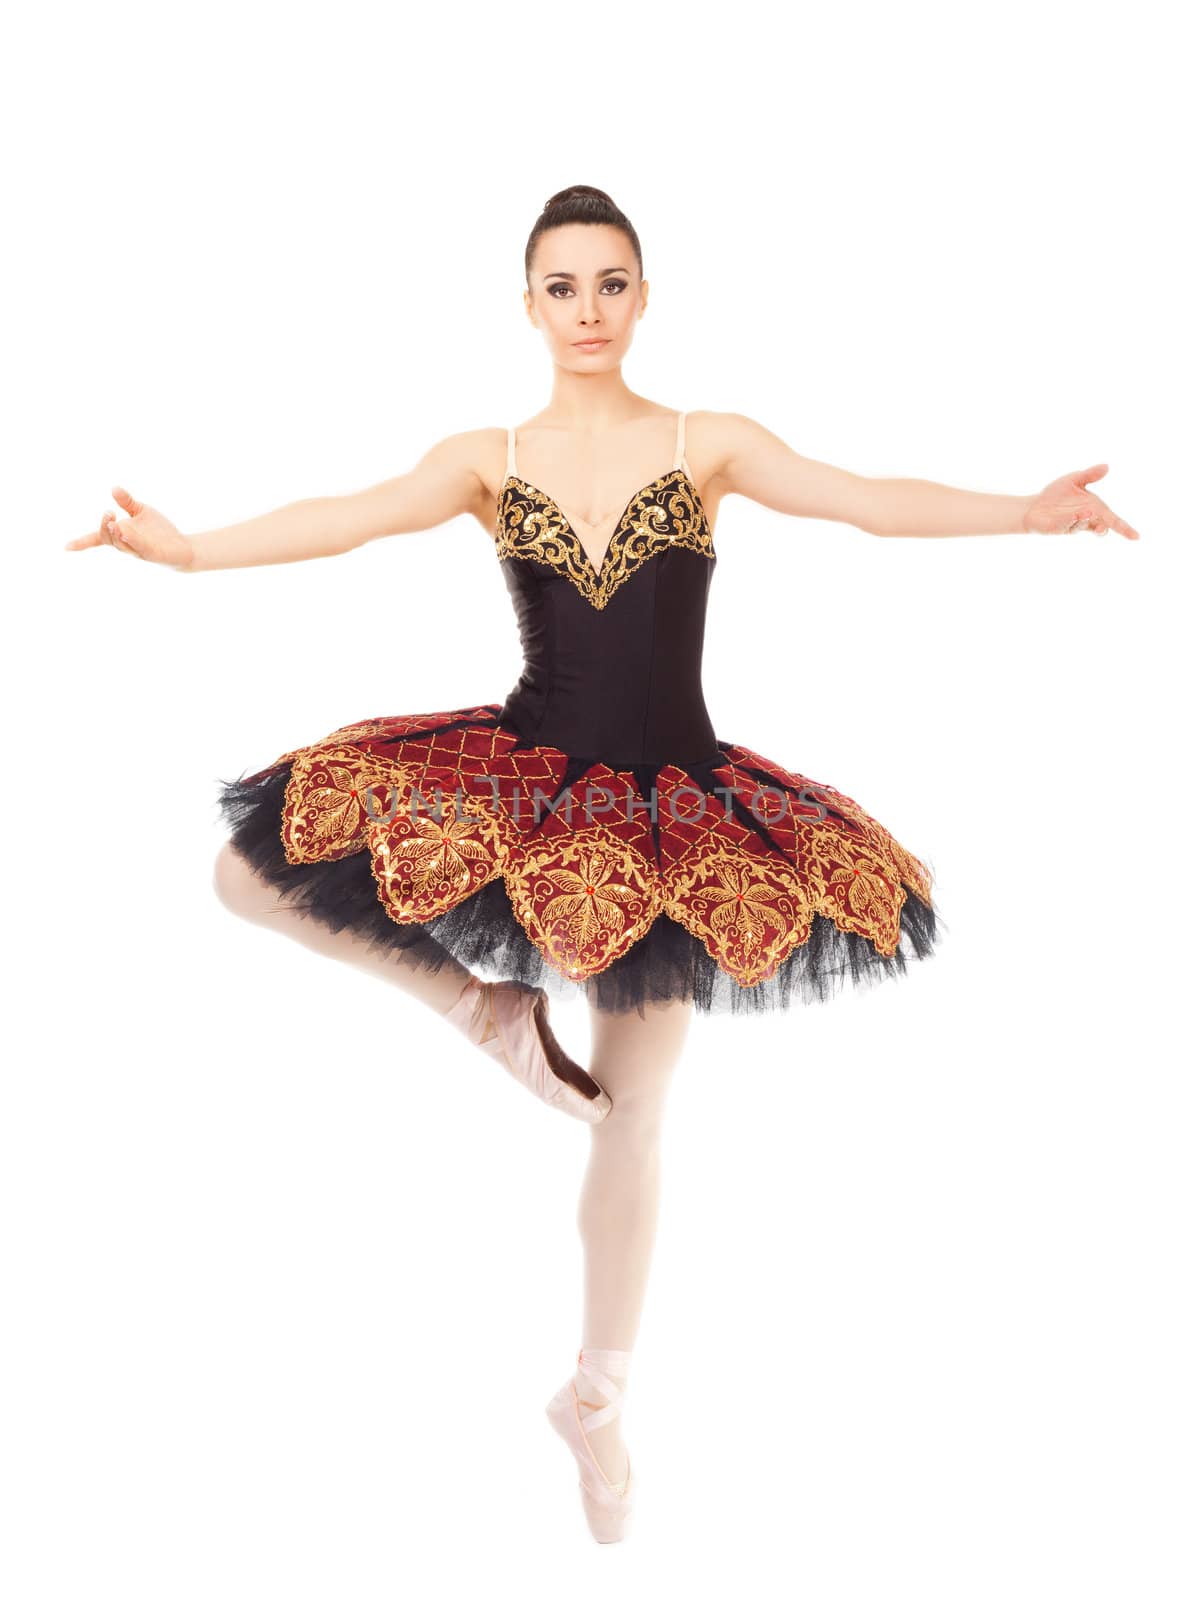 Beautiful female ballerina practicing in tip toe position on white background